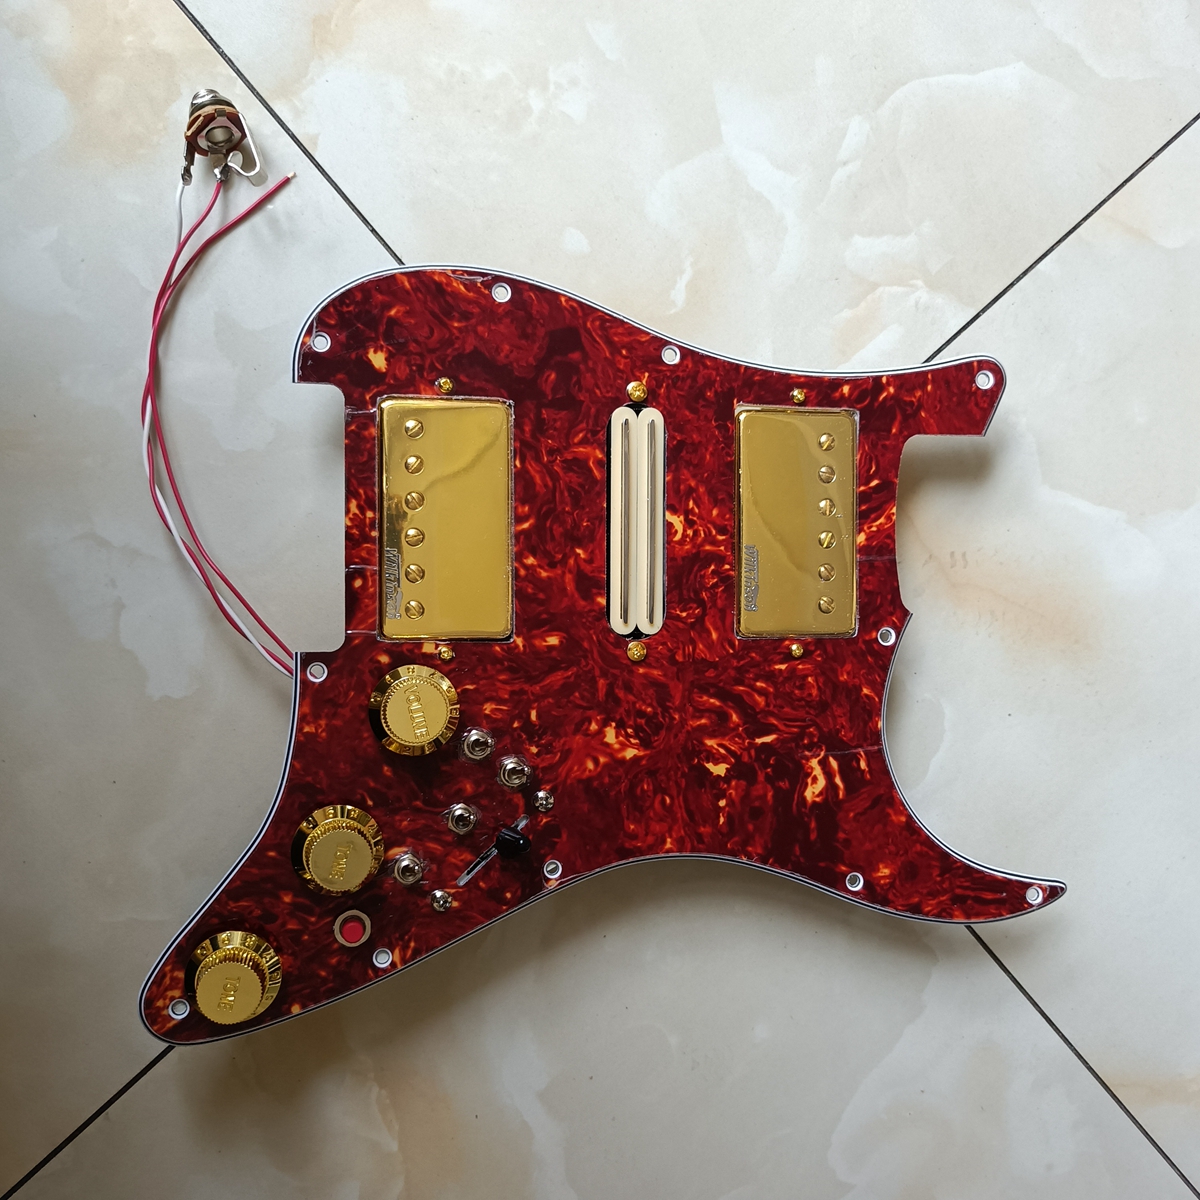 

HSH Upgrade Prewired Pickguard Set Multifunction Switch Gold WK WVC Alnico Pickups 4 Single Cut Switch 20 Tones More for FD Guitar